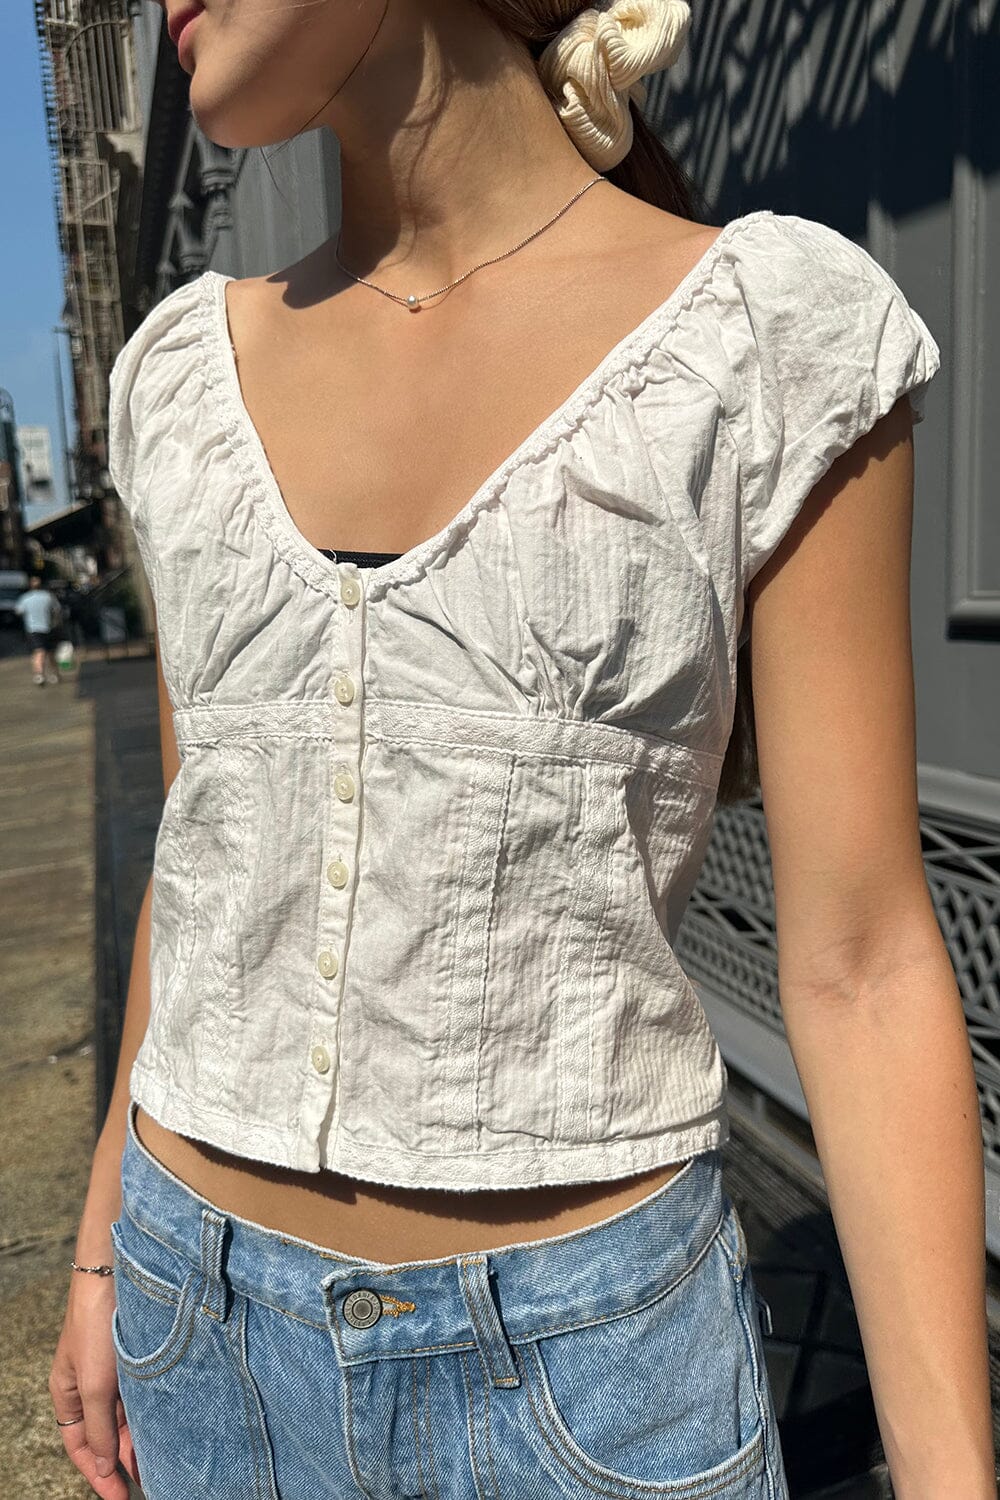 Brandy Melville Top Gray - $19 (17% Off Retail) - From molly